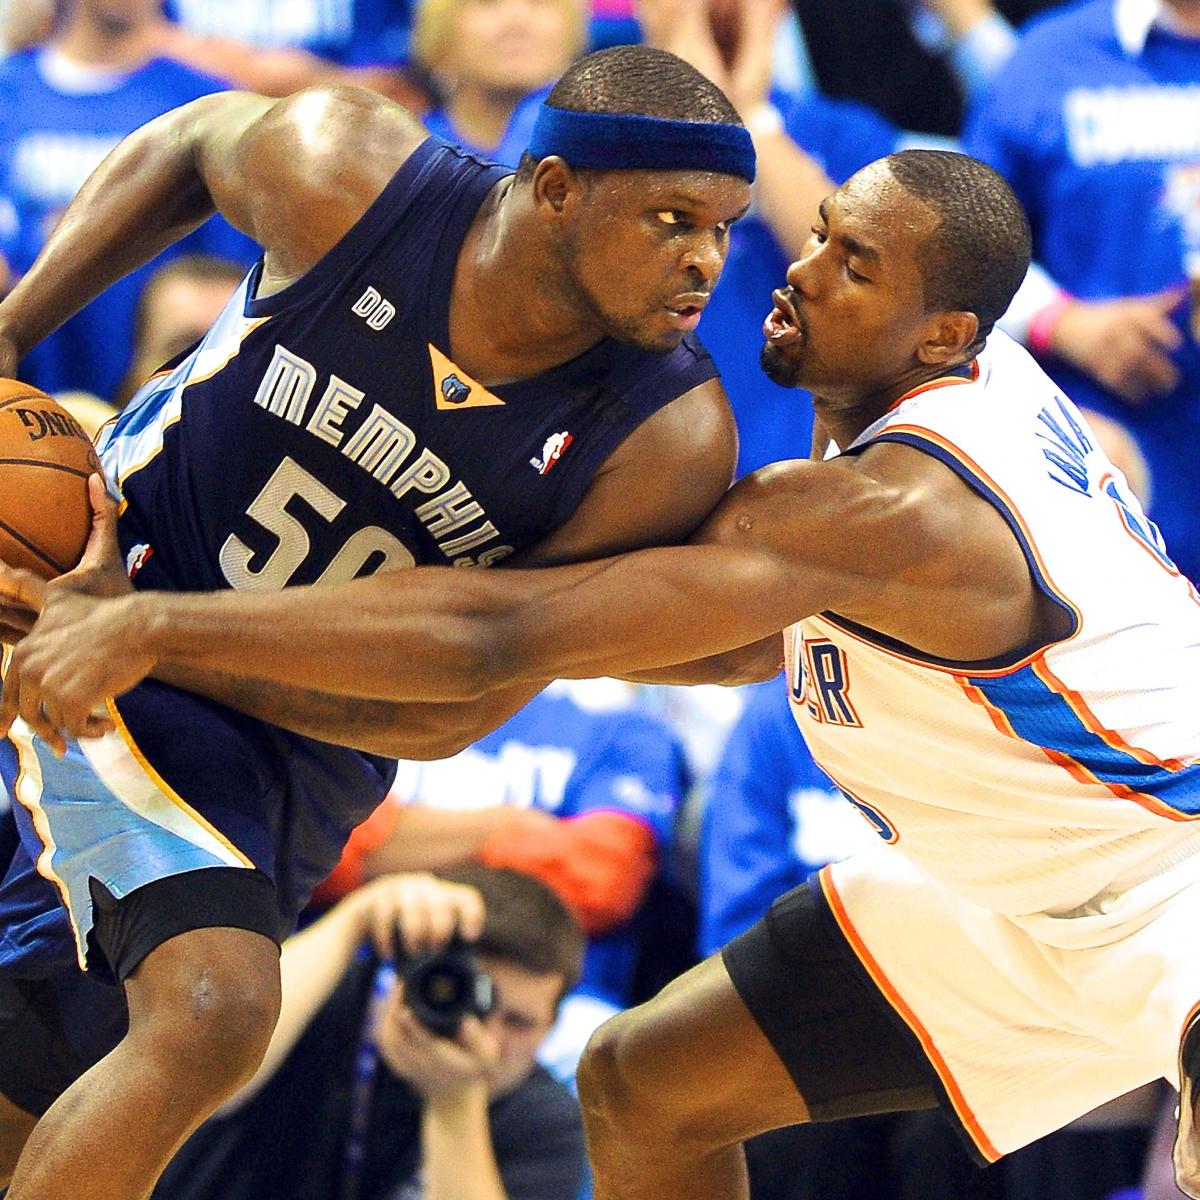 Wife Of Former NBA Player Zach Randolph LEAVES Him A Month After Calling